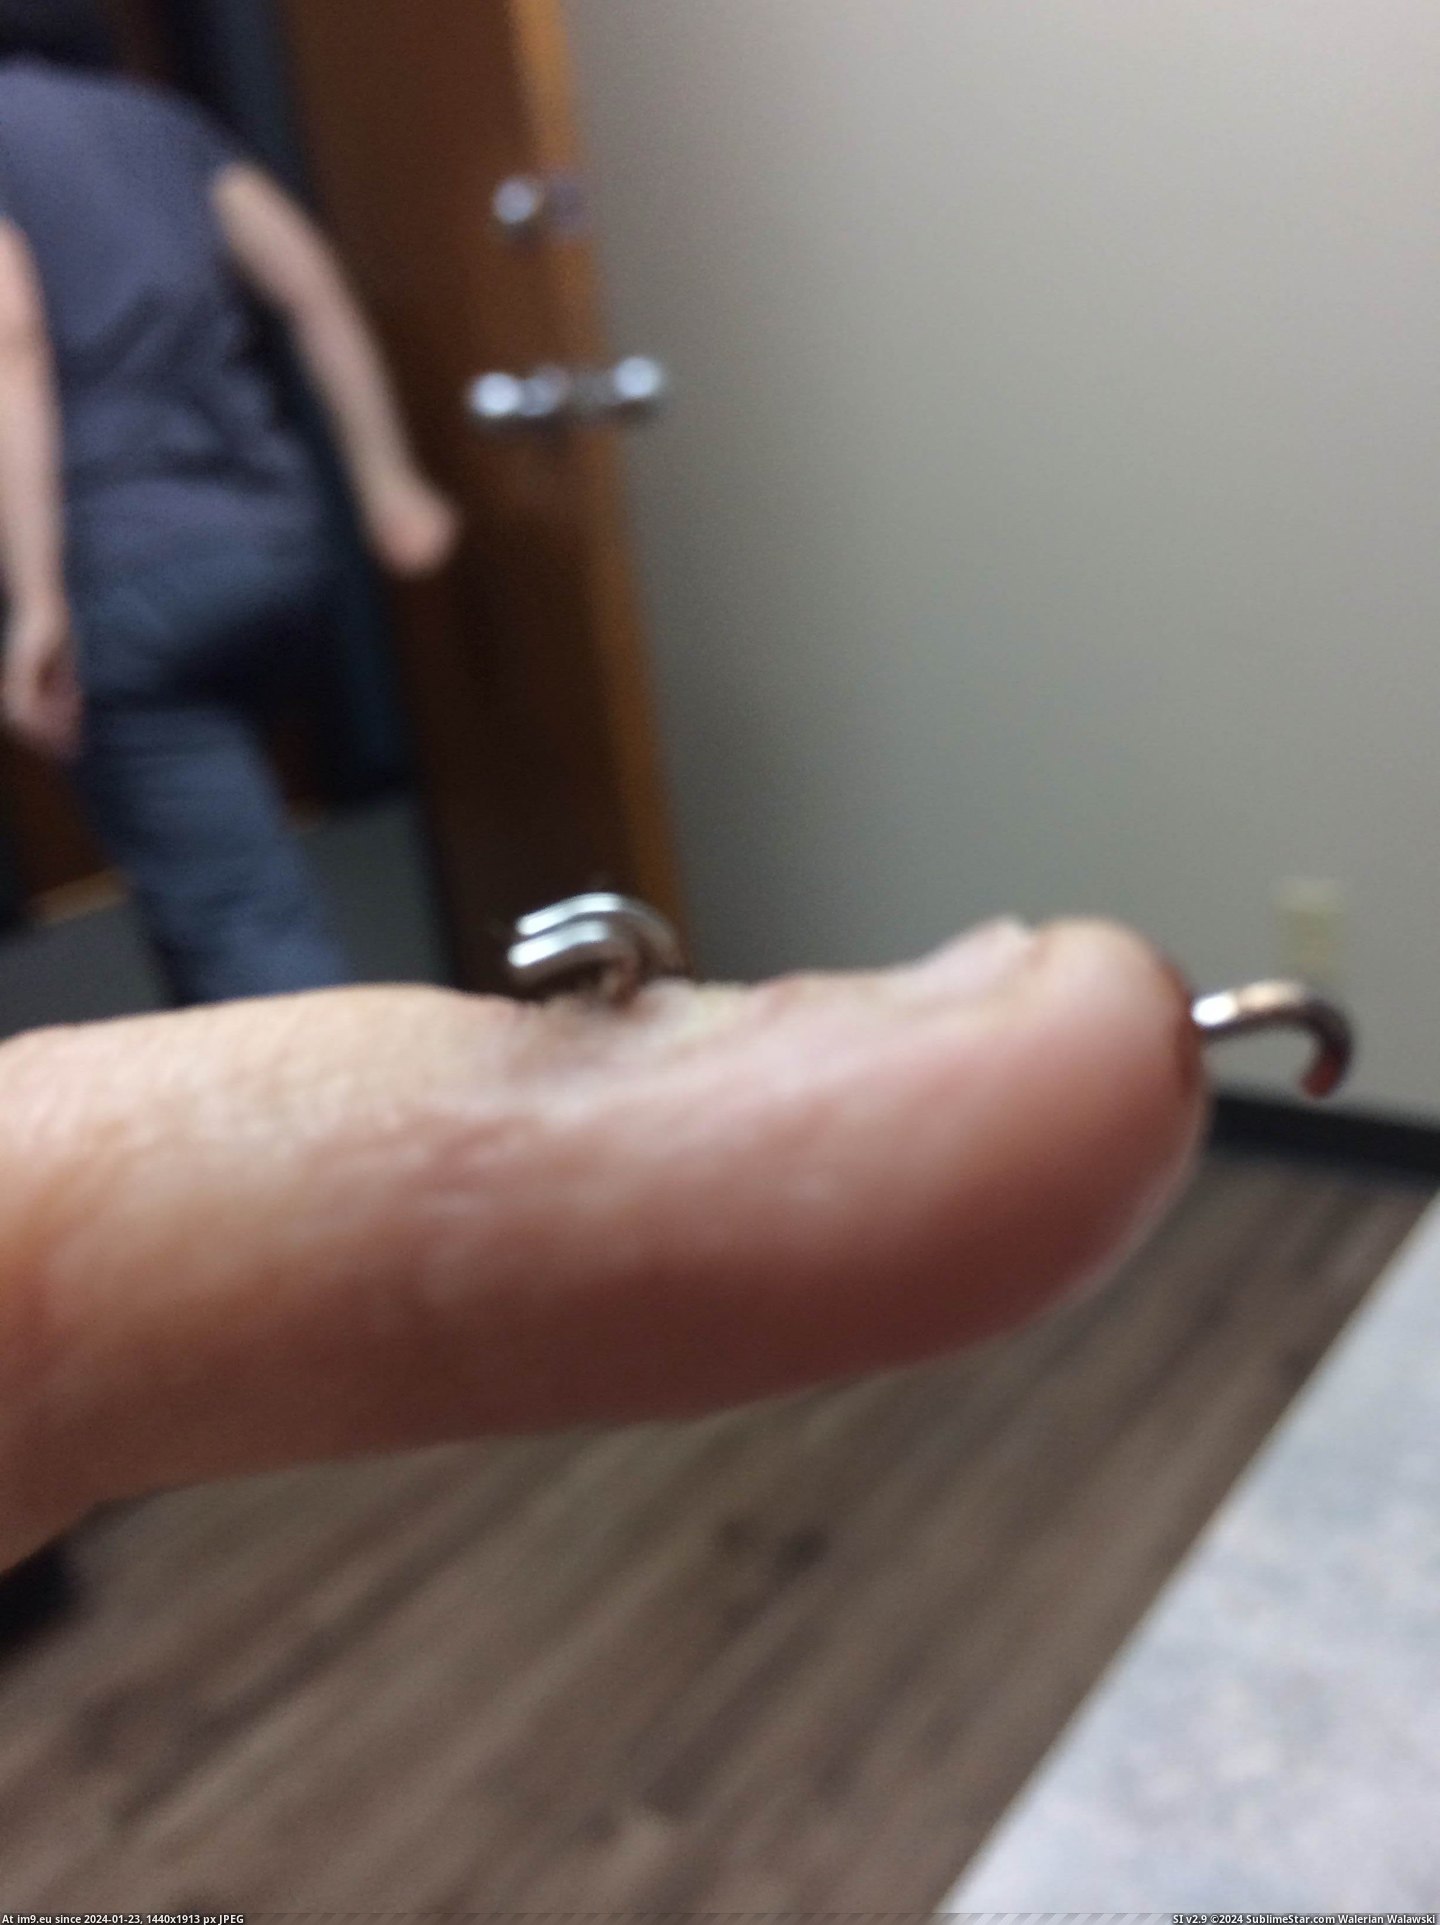 #Wtf #Wife #Pinky #Finger #Broken [Wtf] My Wife's Broken Pinky Finger 1 Pic. (Image of album My r/WTF favs))